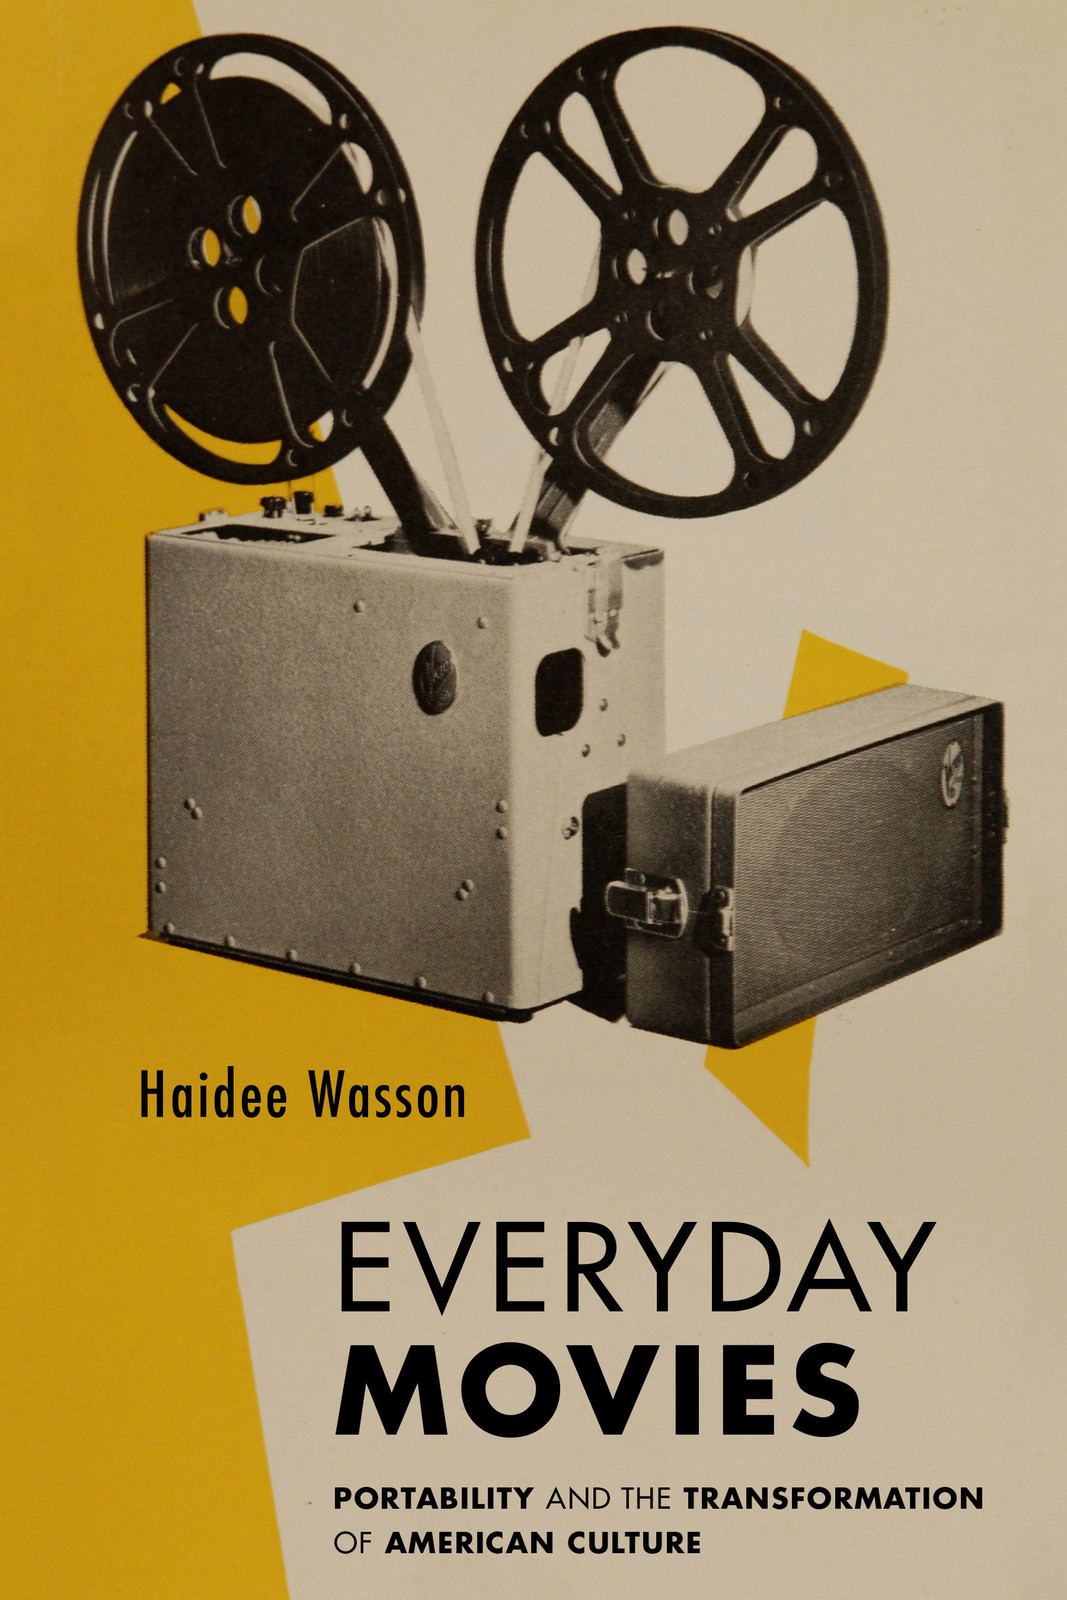 Cover of Everyday Movies: Portable Film Projectors and the Transformation of American Culture, University of California Press